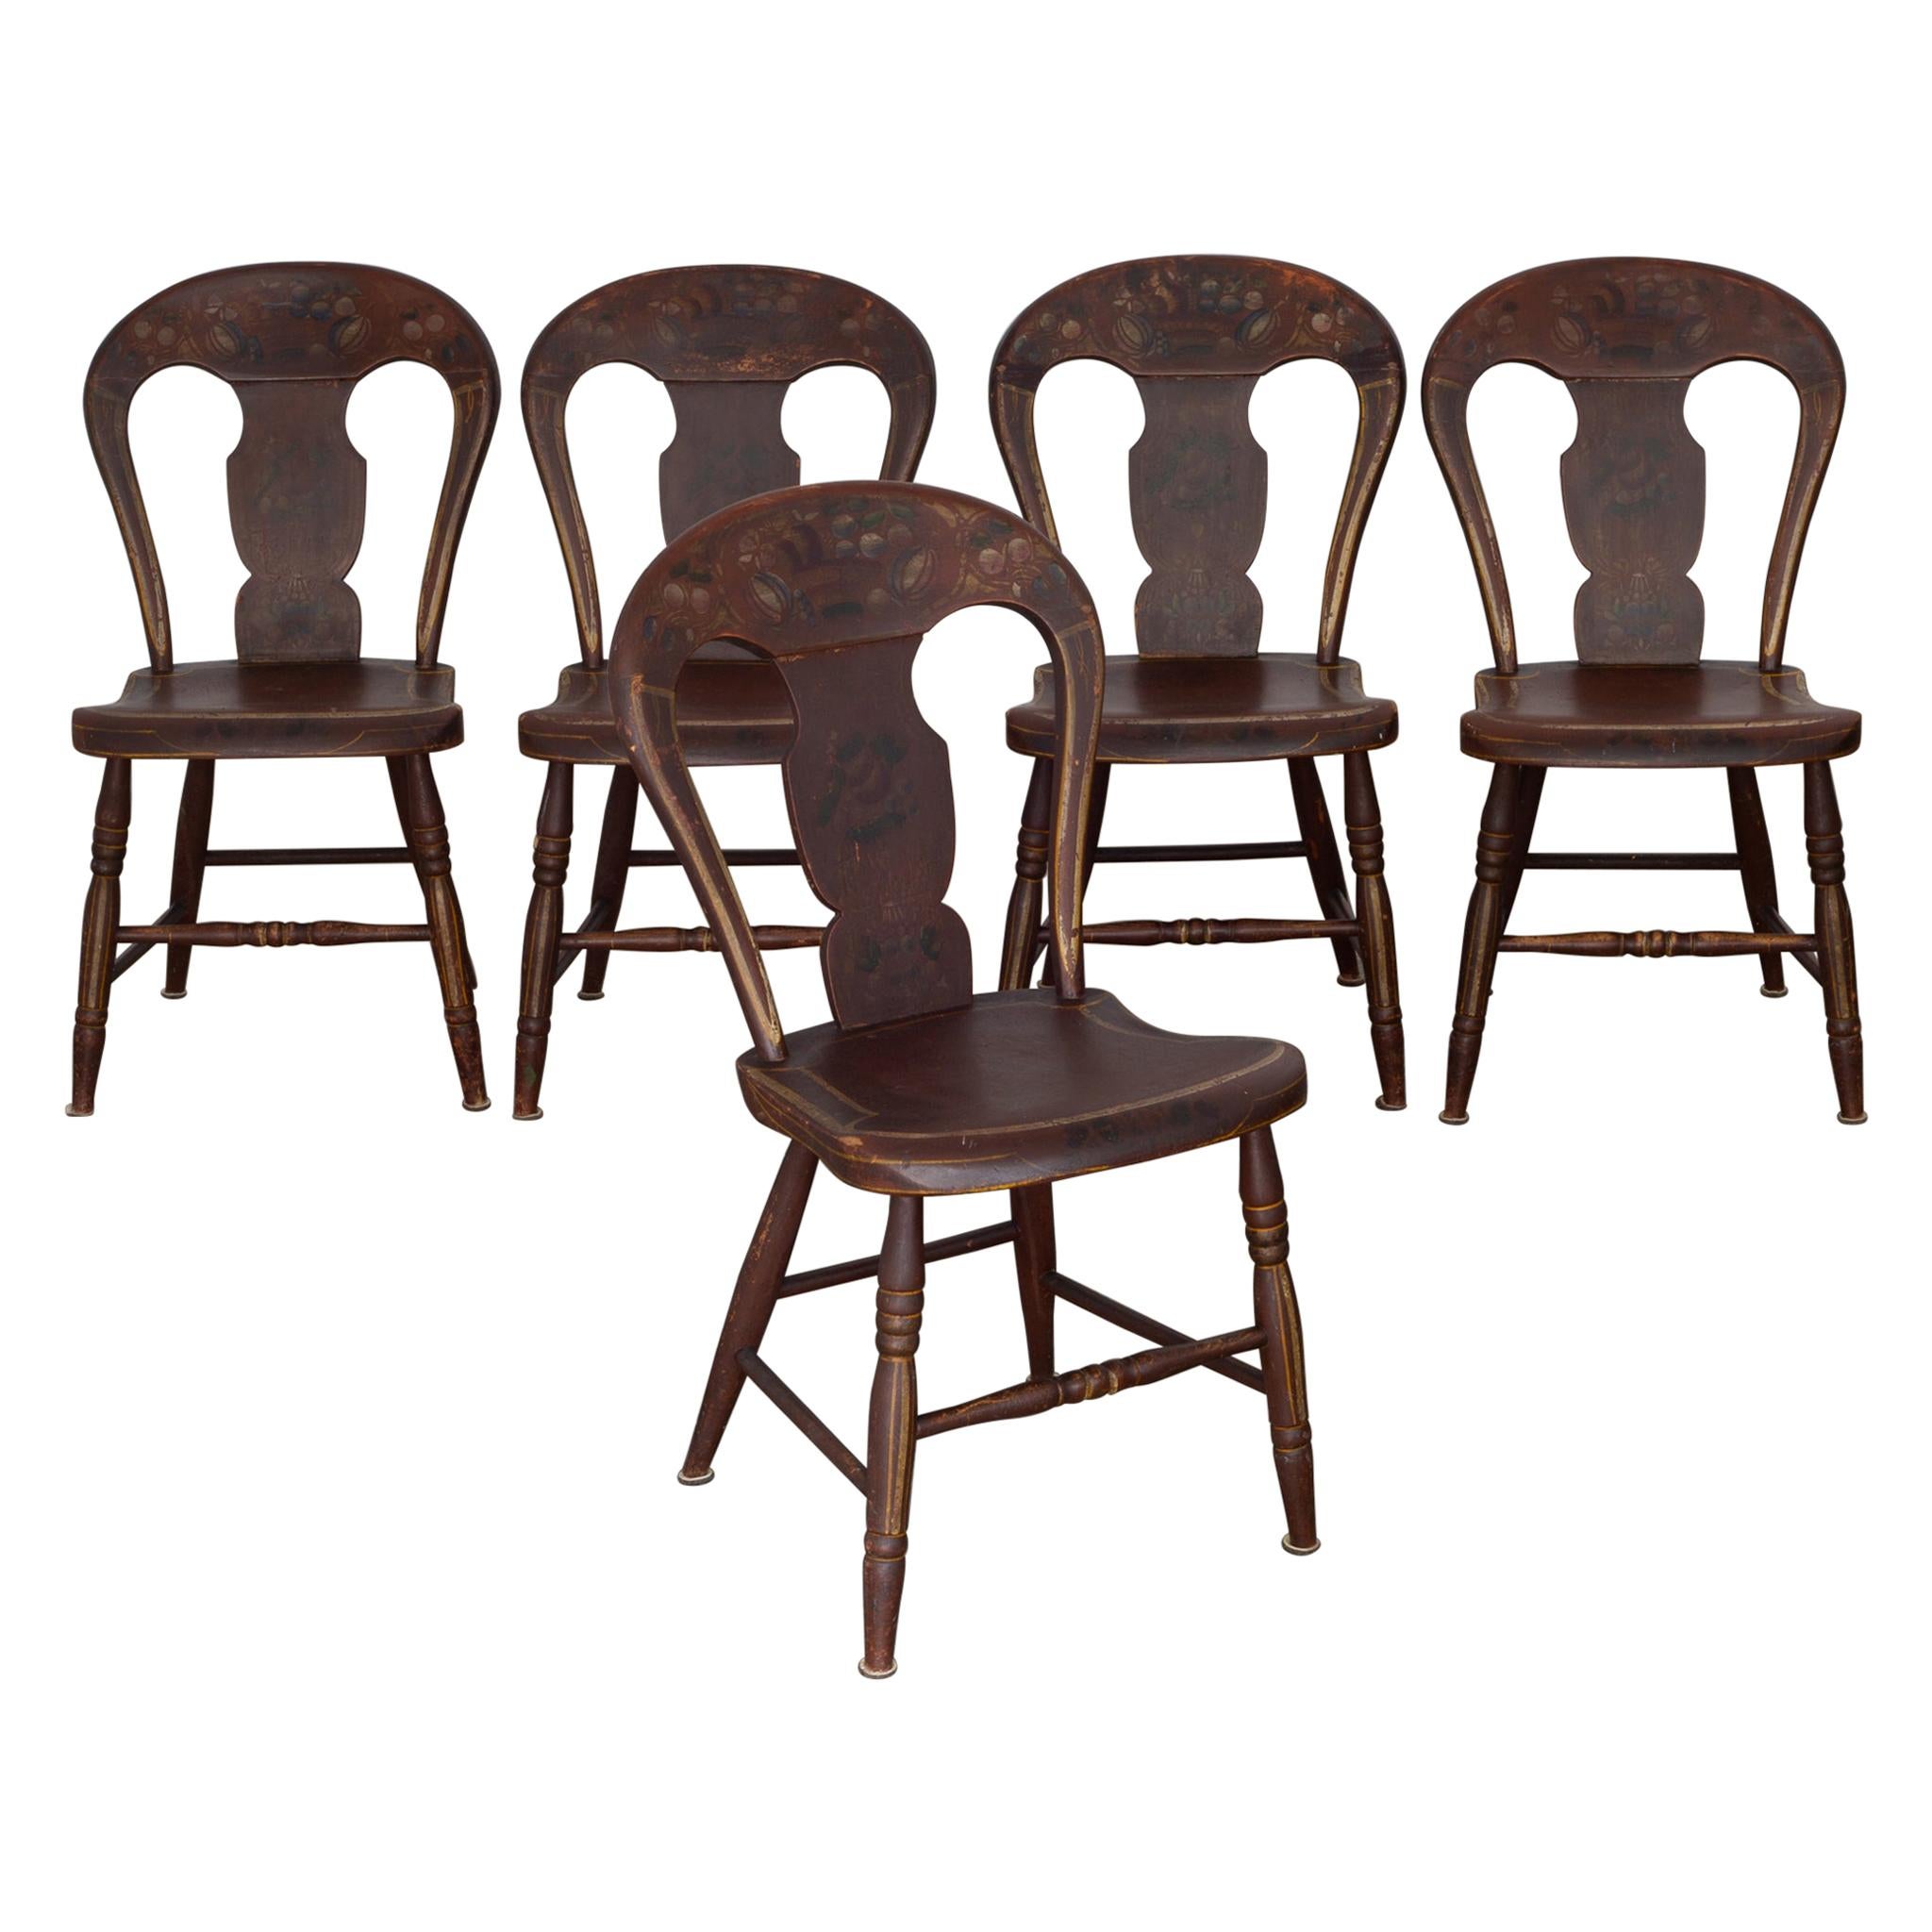 Set of Federal Period Pennsylvania Painted Chairs, circa 1810